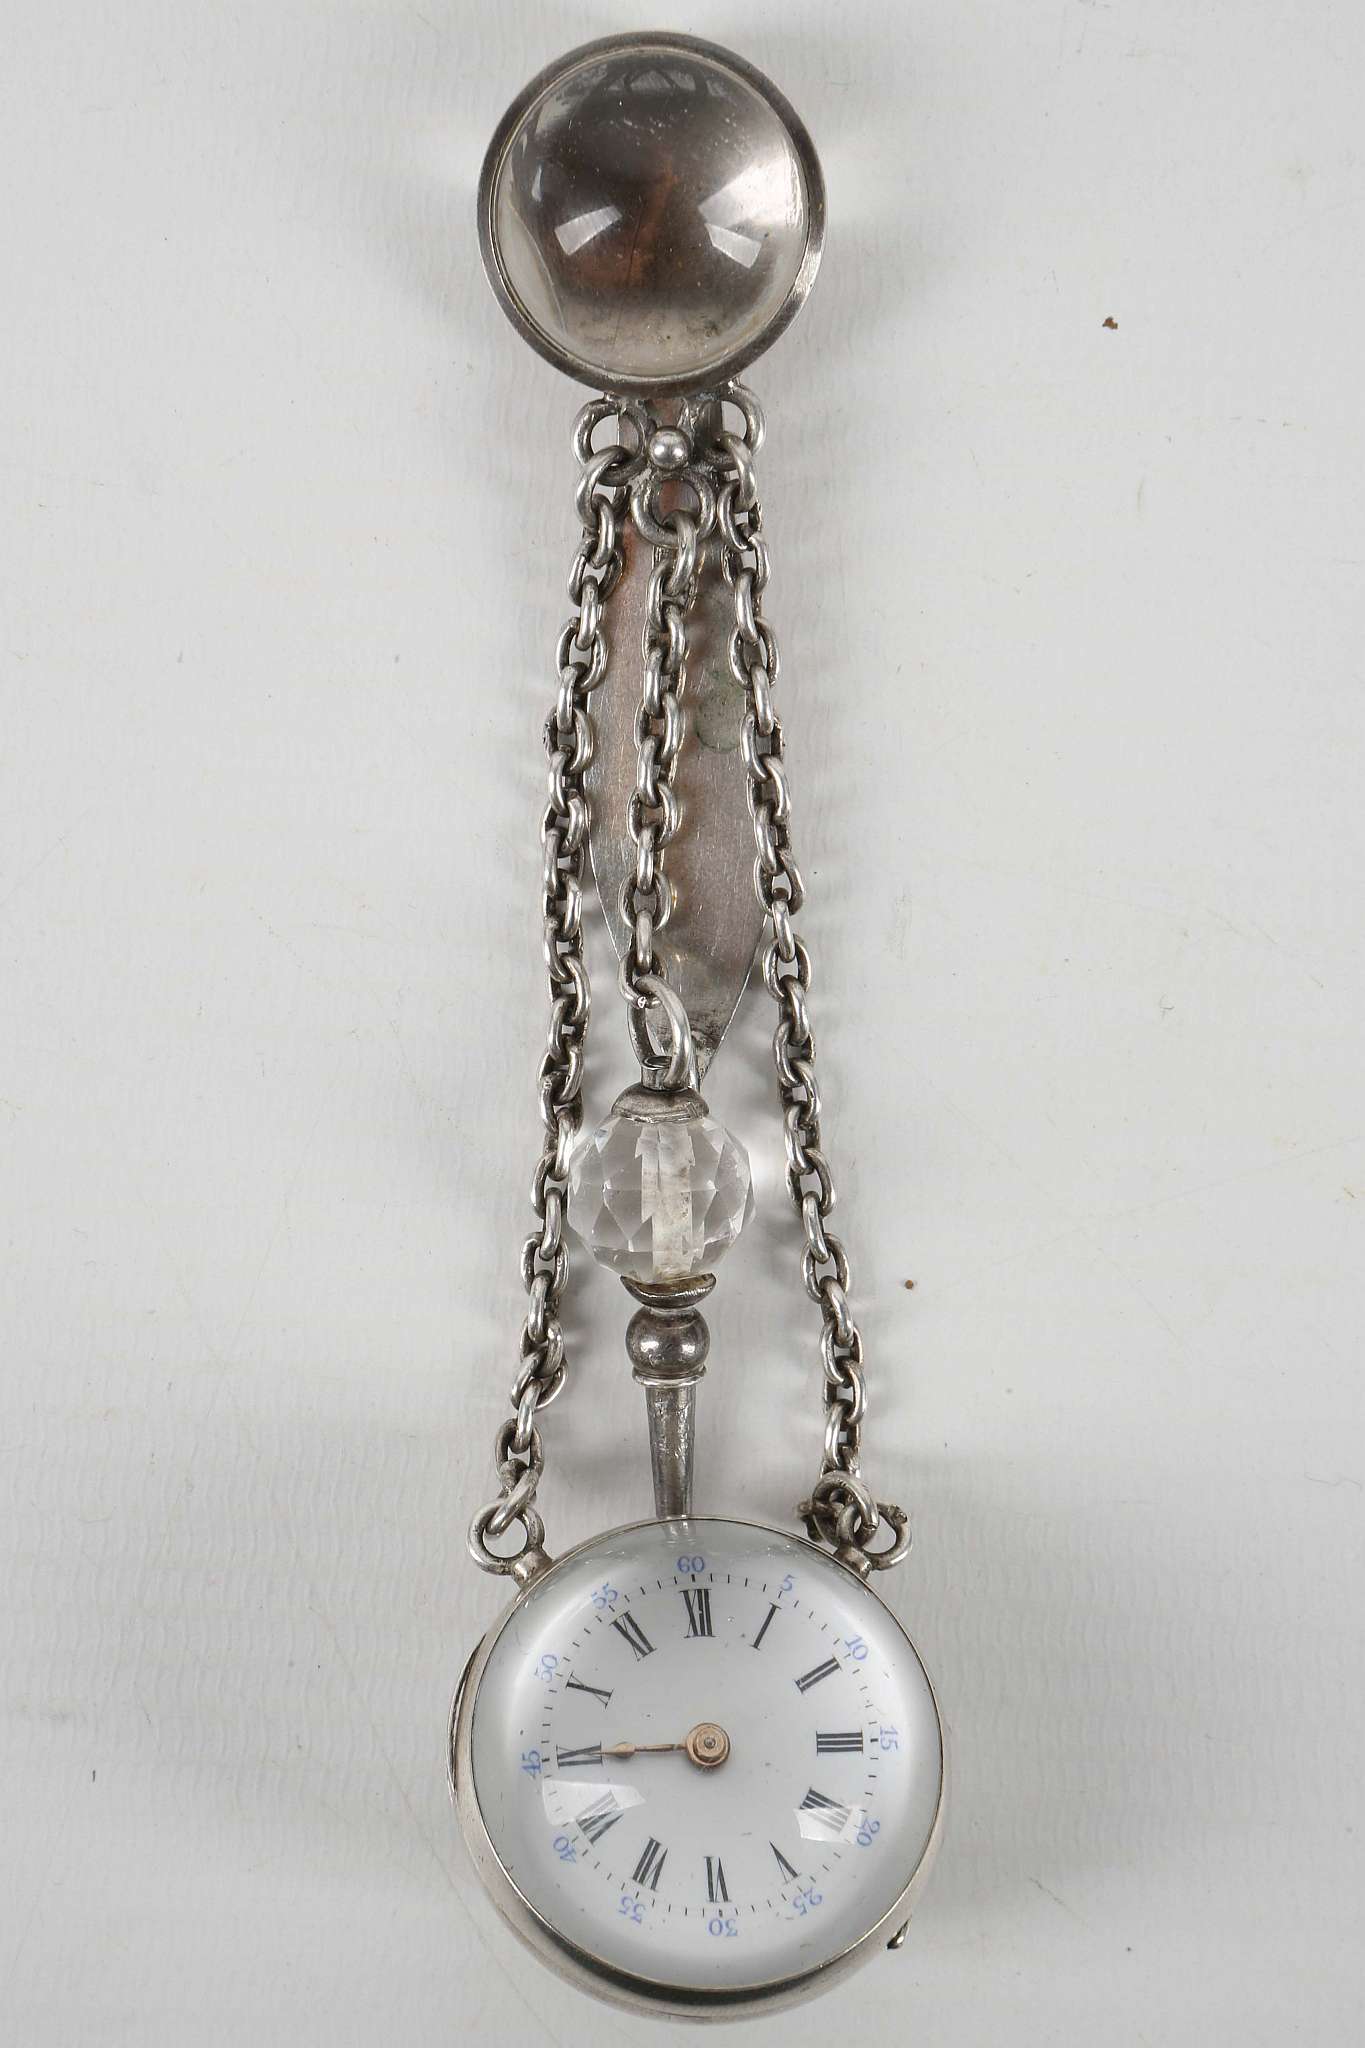 A sterling silver pendant watch on chain with attached clip and key